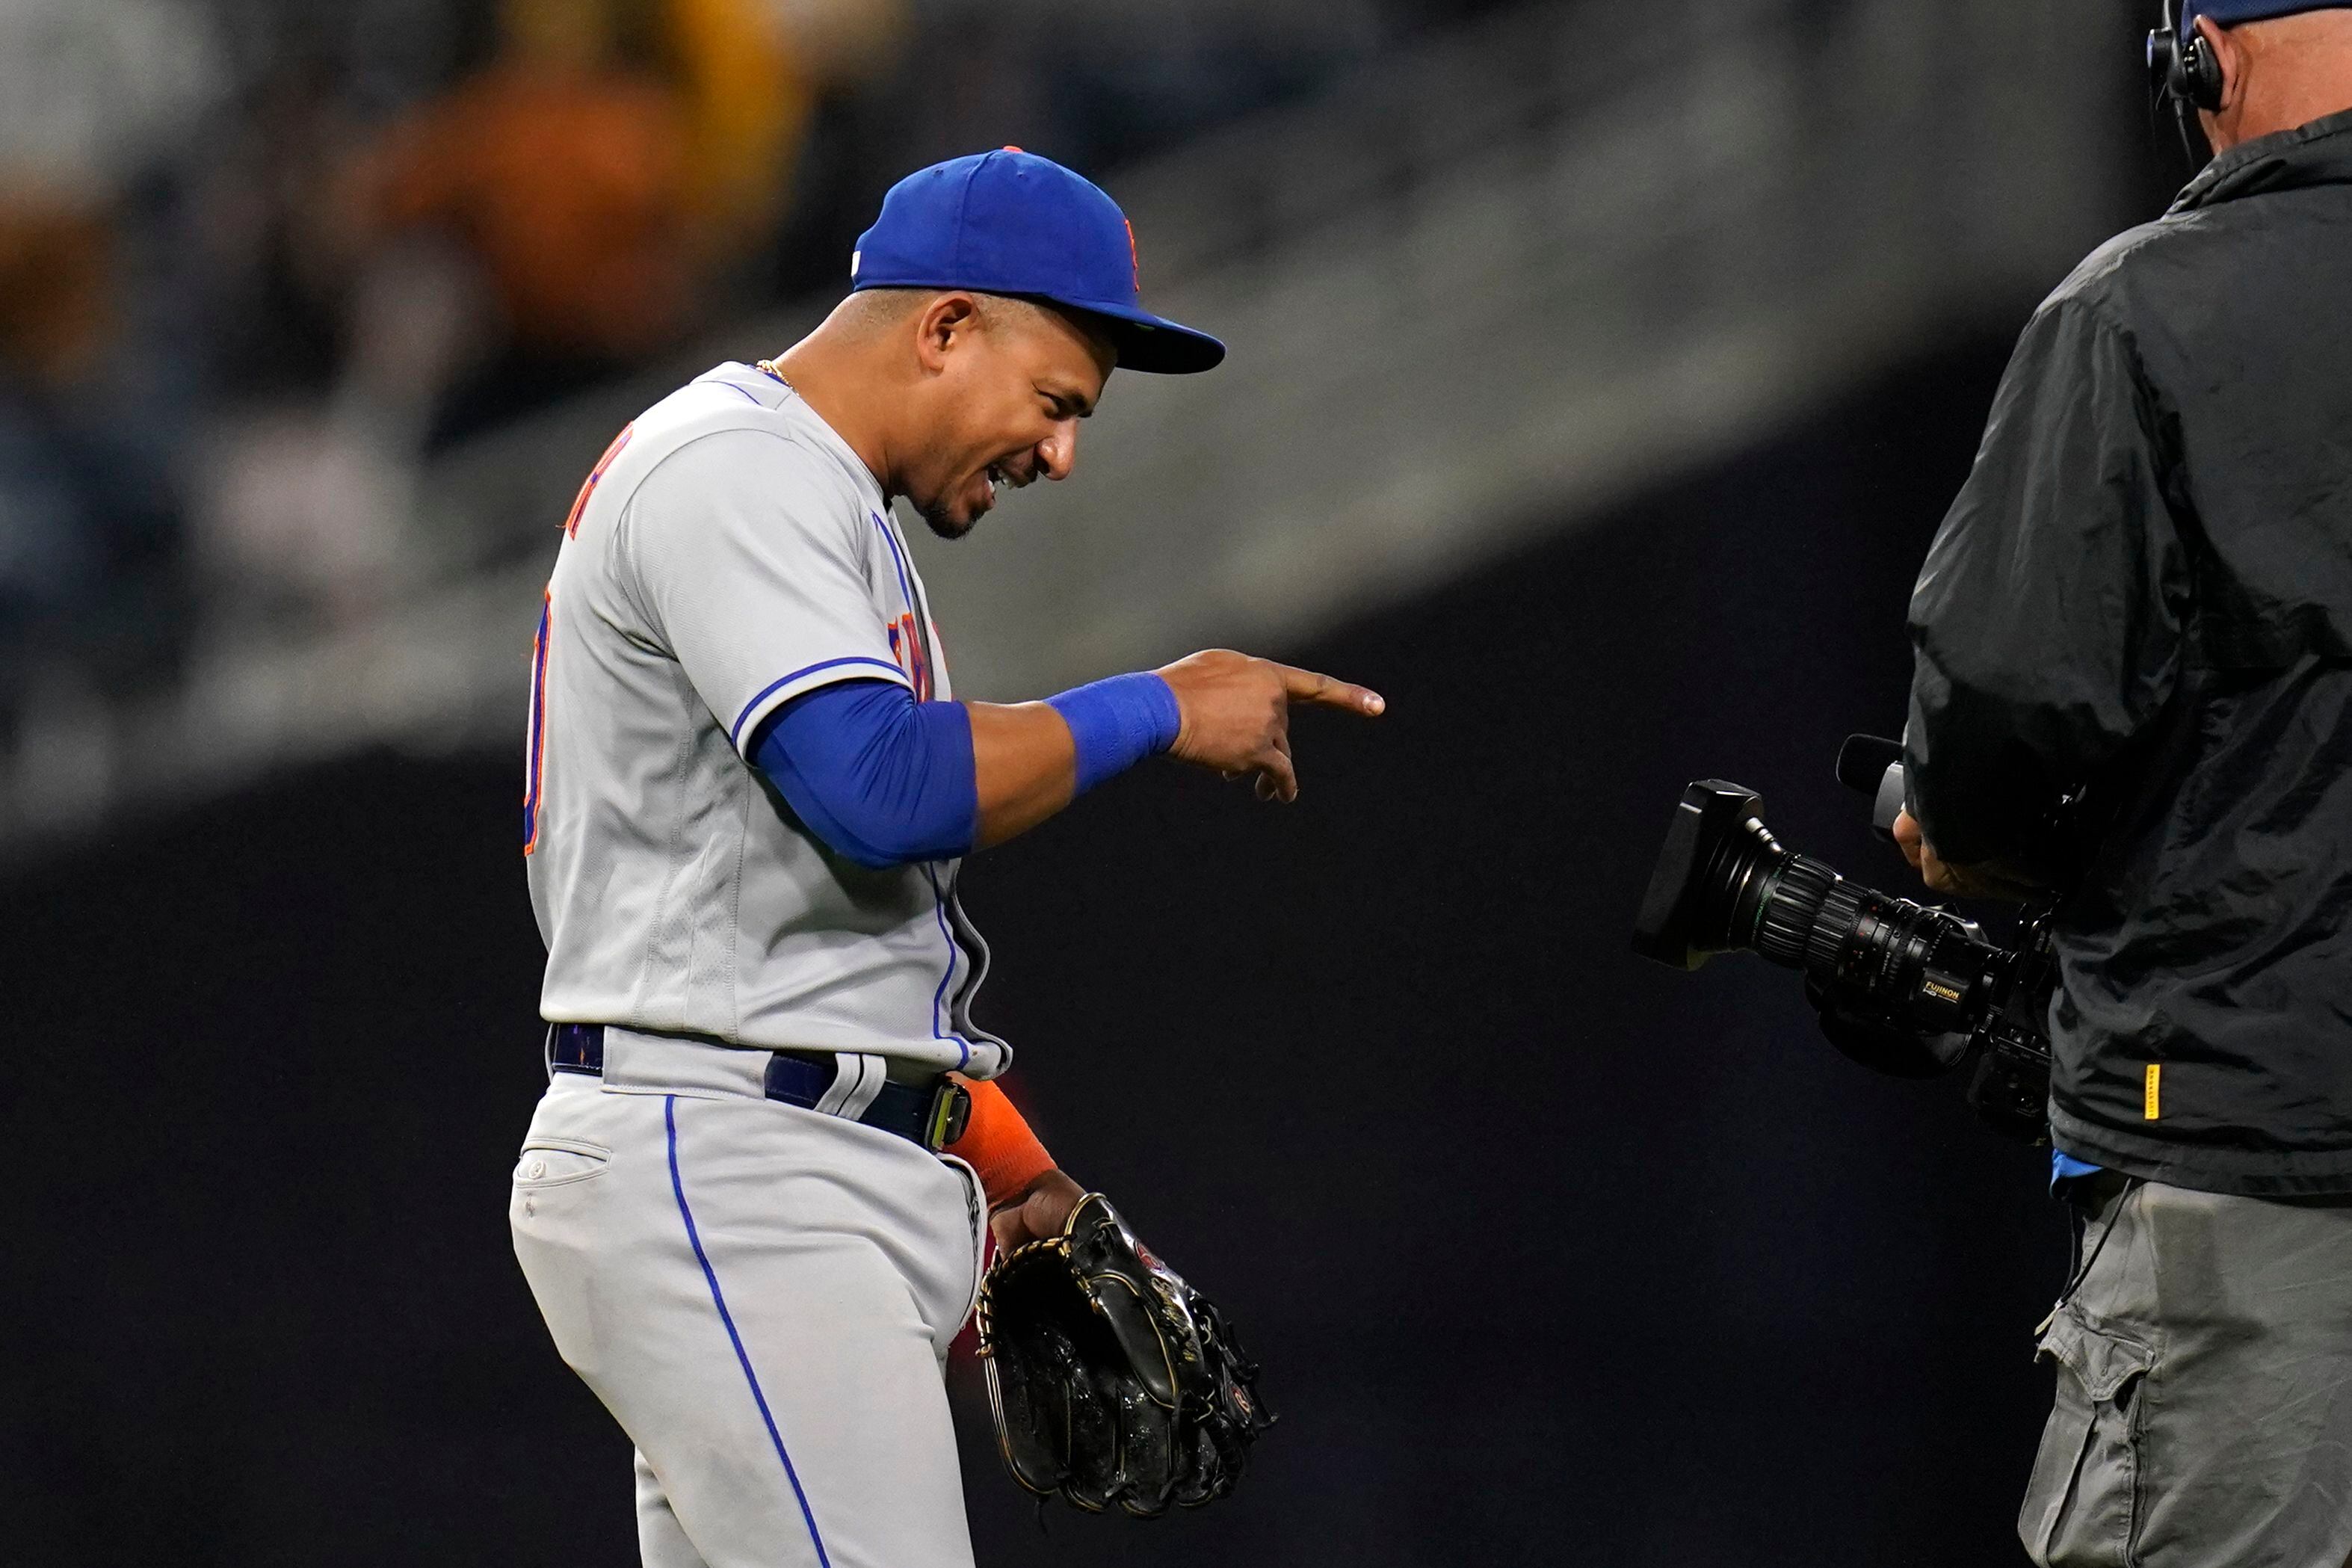 Mets' Eduardo Escobar Hits for Cycle in Win Over Padres - The New